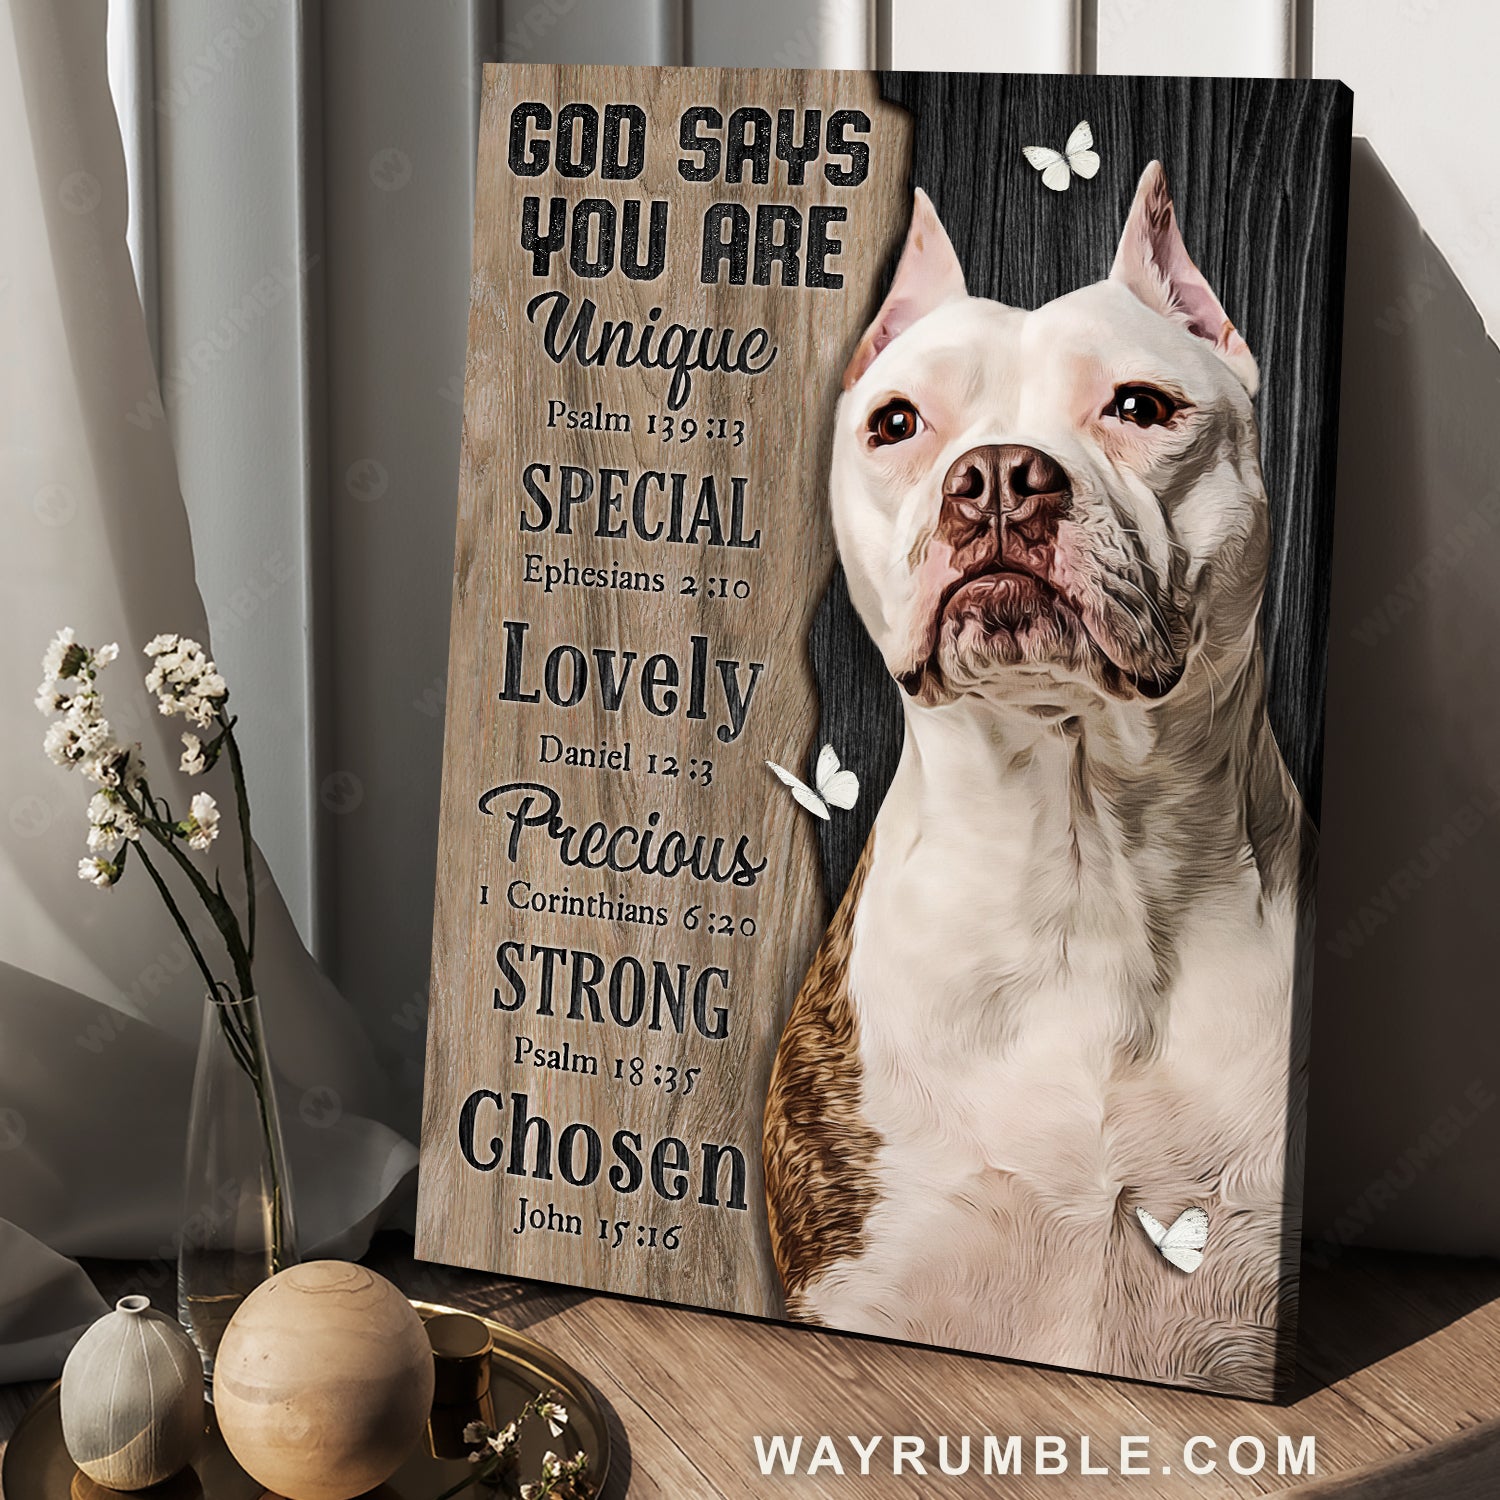 Watercolor Pitbull drawing, White butterfly, God says you are unique - Jesus Portrait Canvas Prints, Home Decor Wall Art